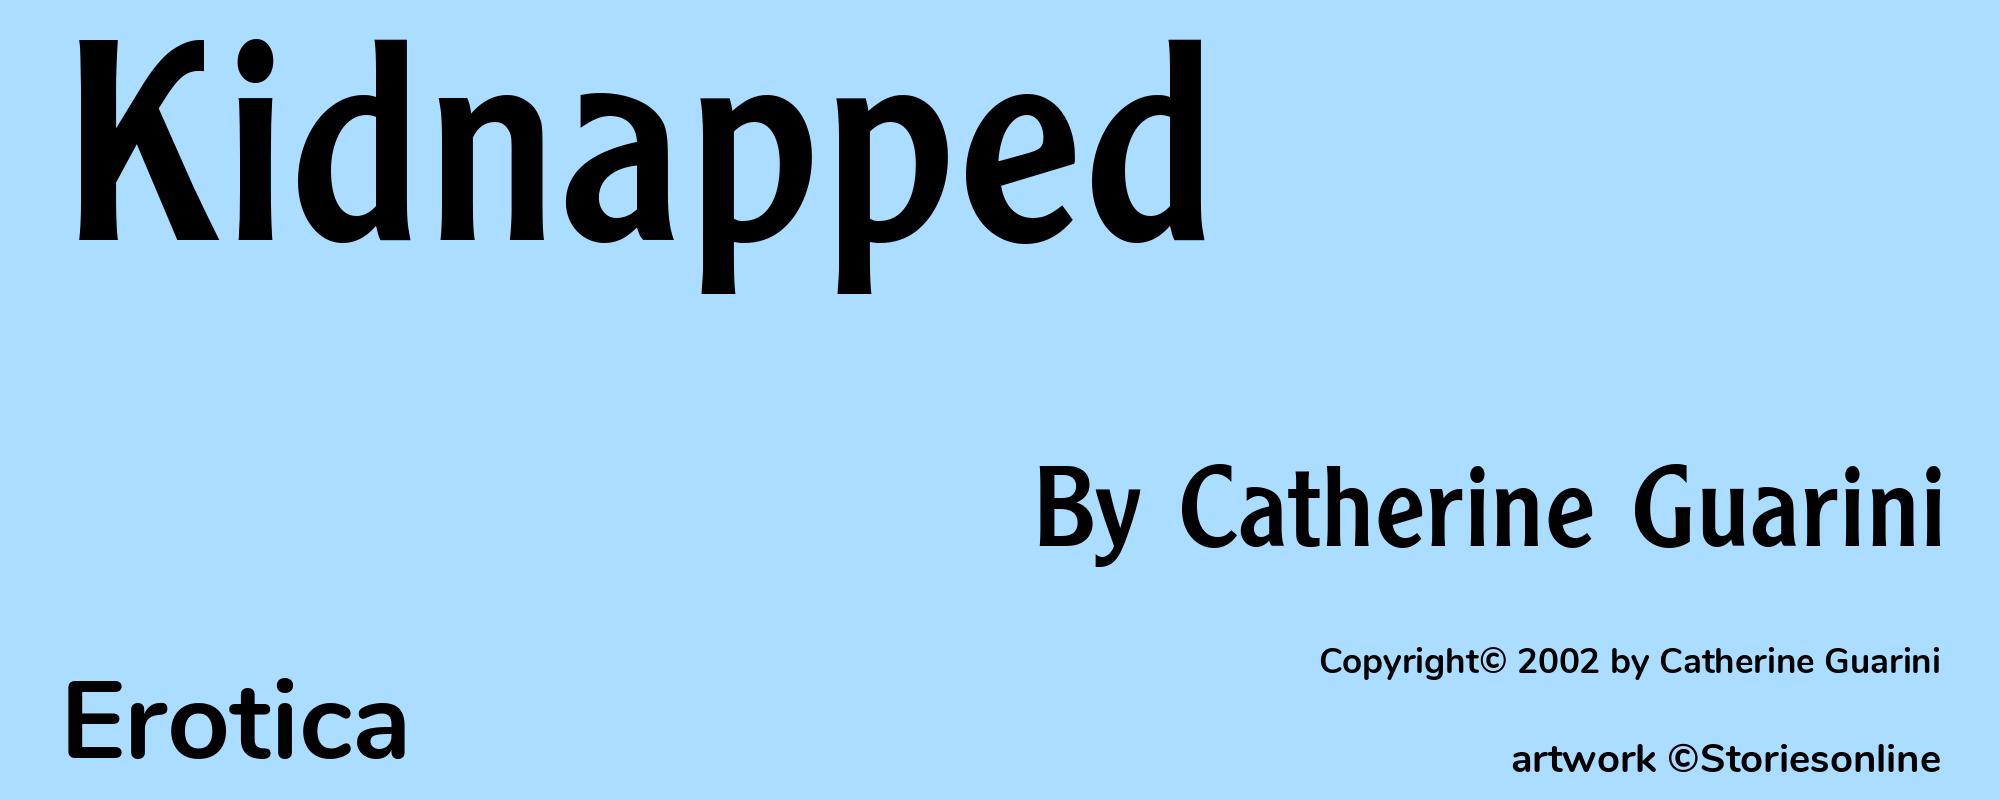 Kidnapped - Cover